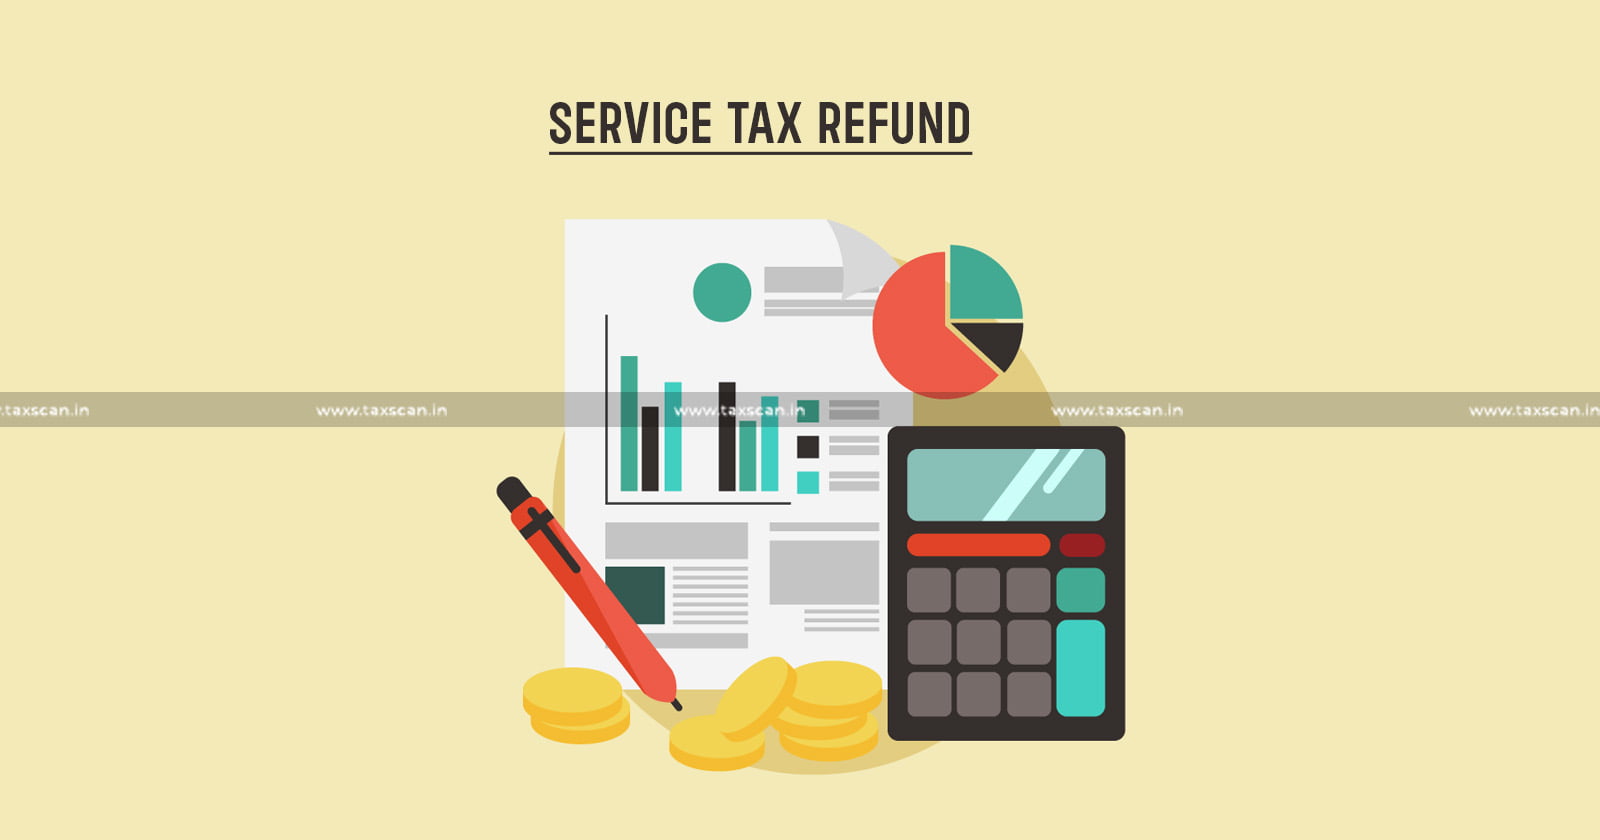 Claim for Service Tax Refund - Service Tax Refund - Tax Refund - Tax Refund to Meet VAT Demand - Meet VAT Demand - VAT Demand - Pest Control Contract - TAXSCAN